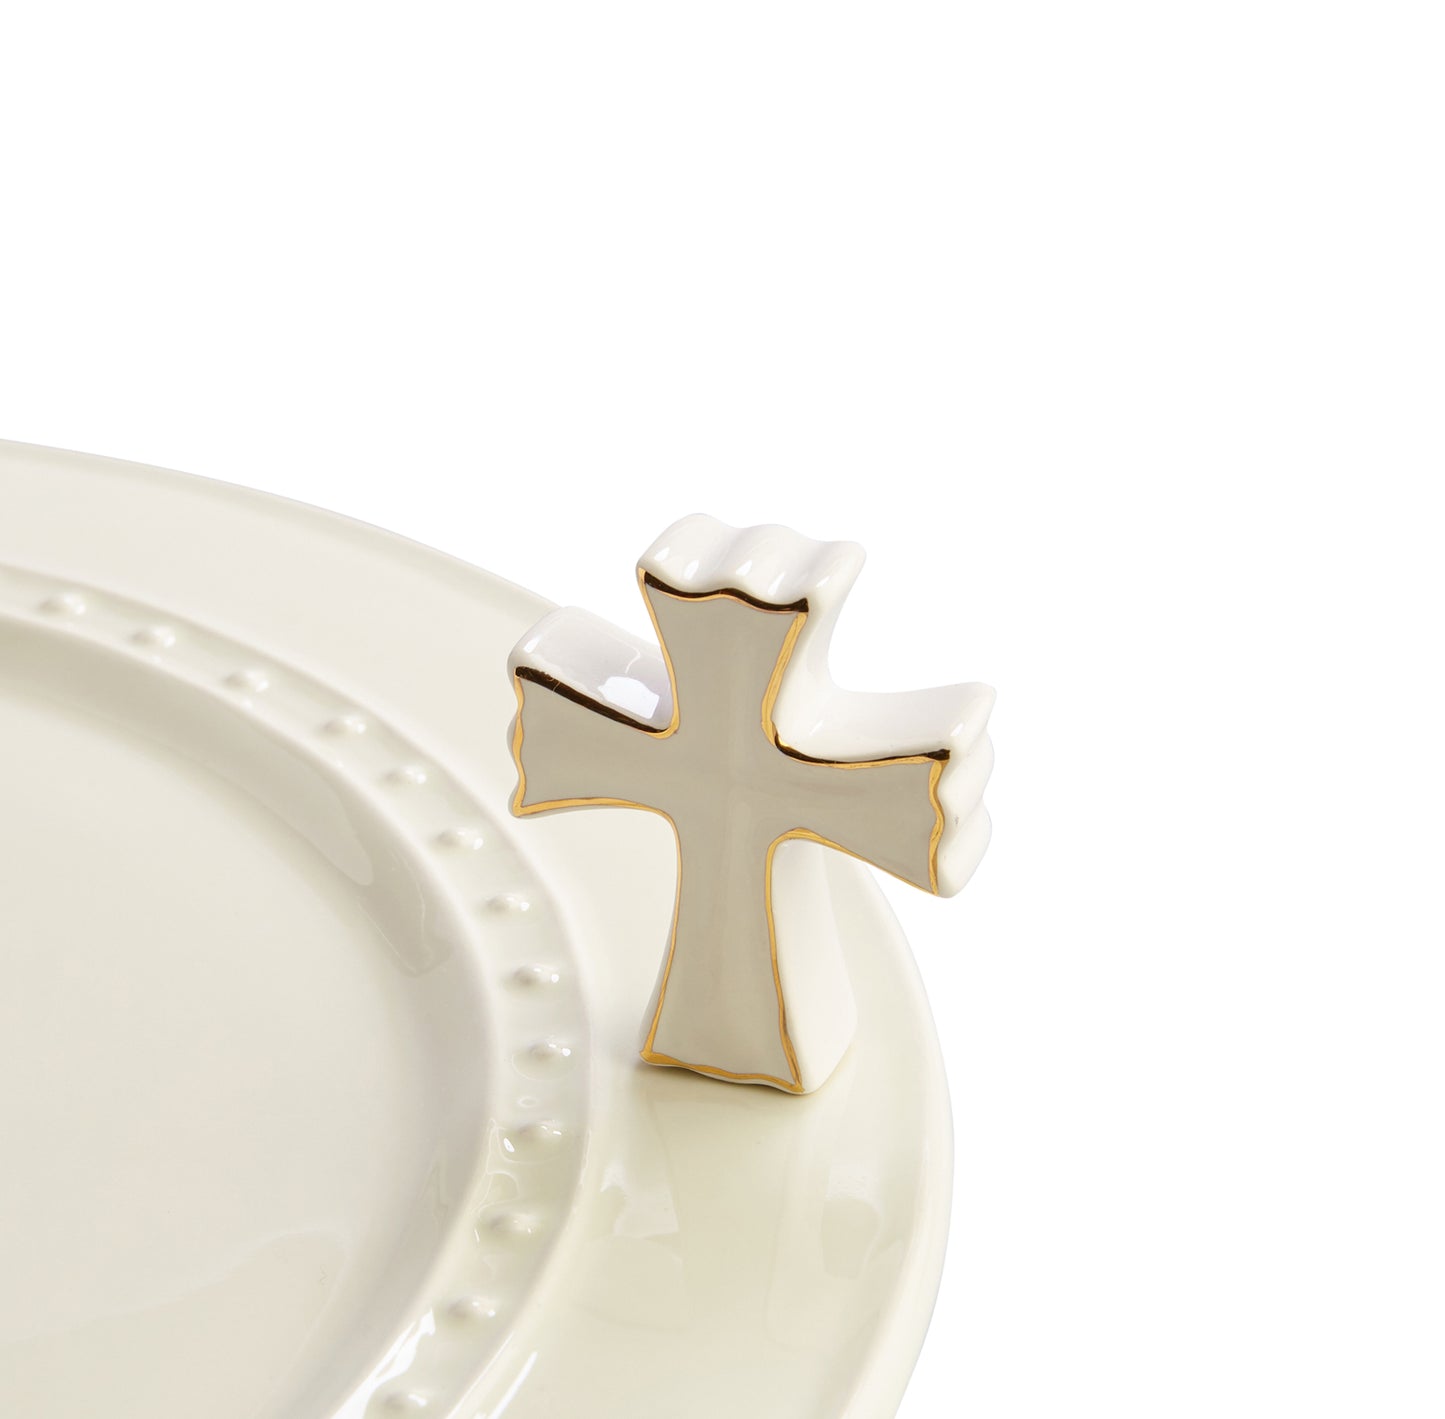 Nora Fleming White Cross mini with gold accent. Shop at The Painted Cottage in Edgewater, MD.